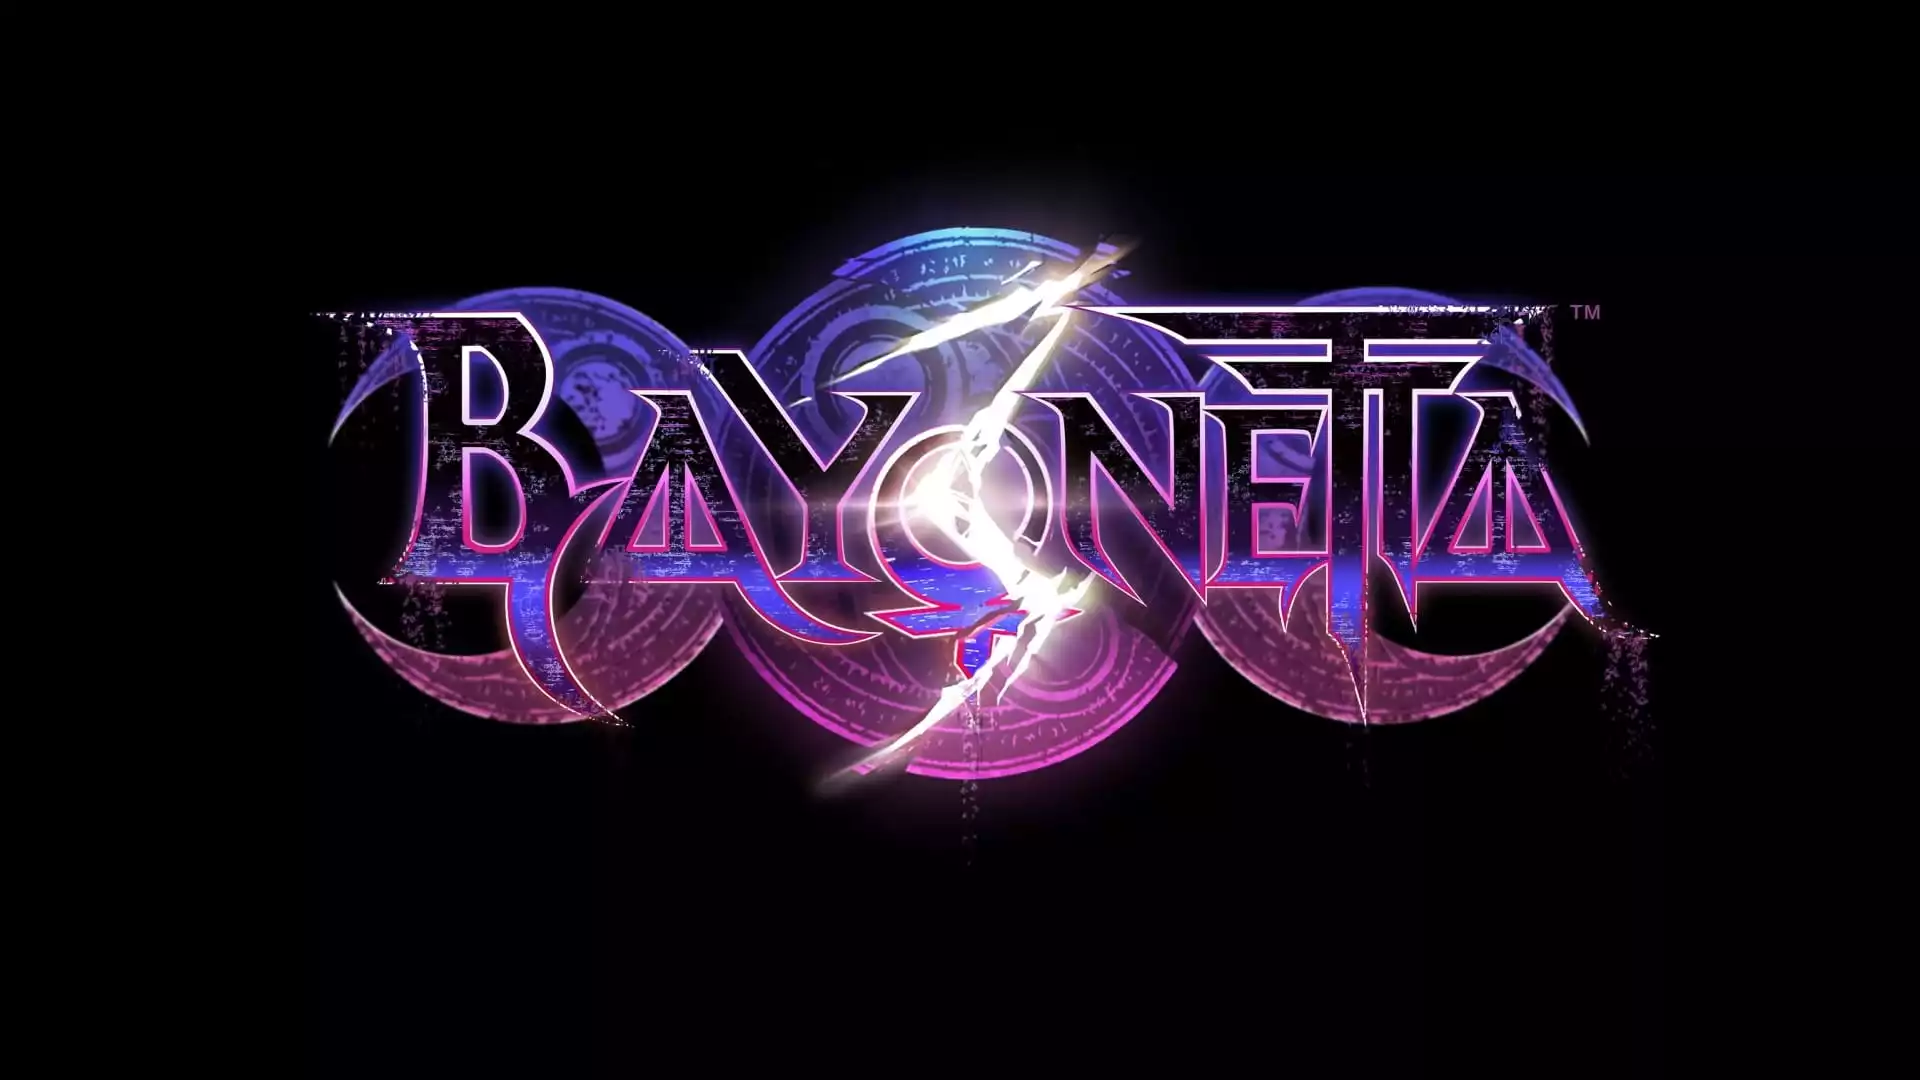 Bayonetta 3: Release Date, Trailers, Gameplay, And More